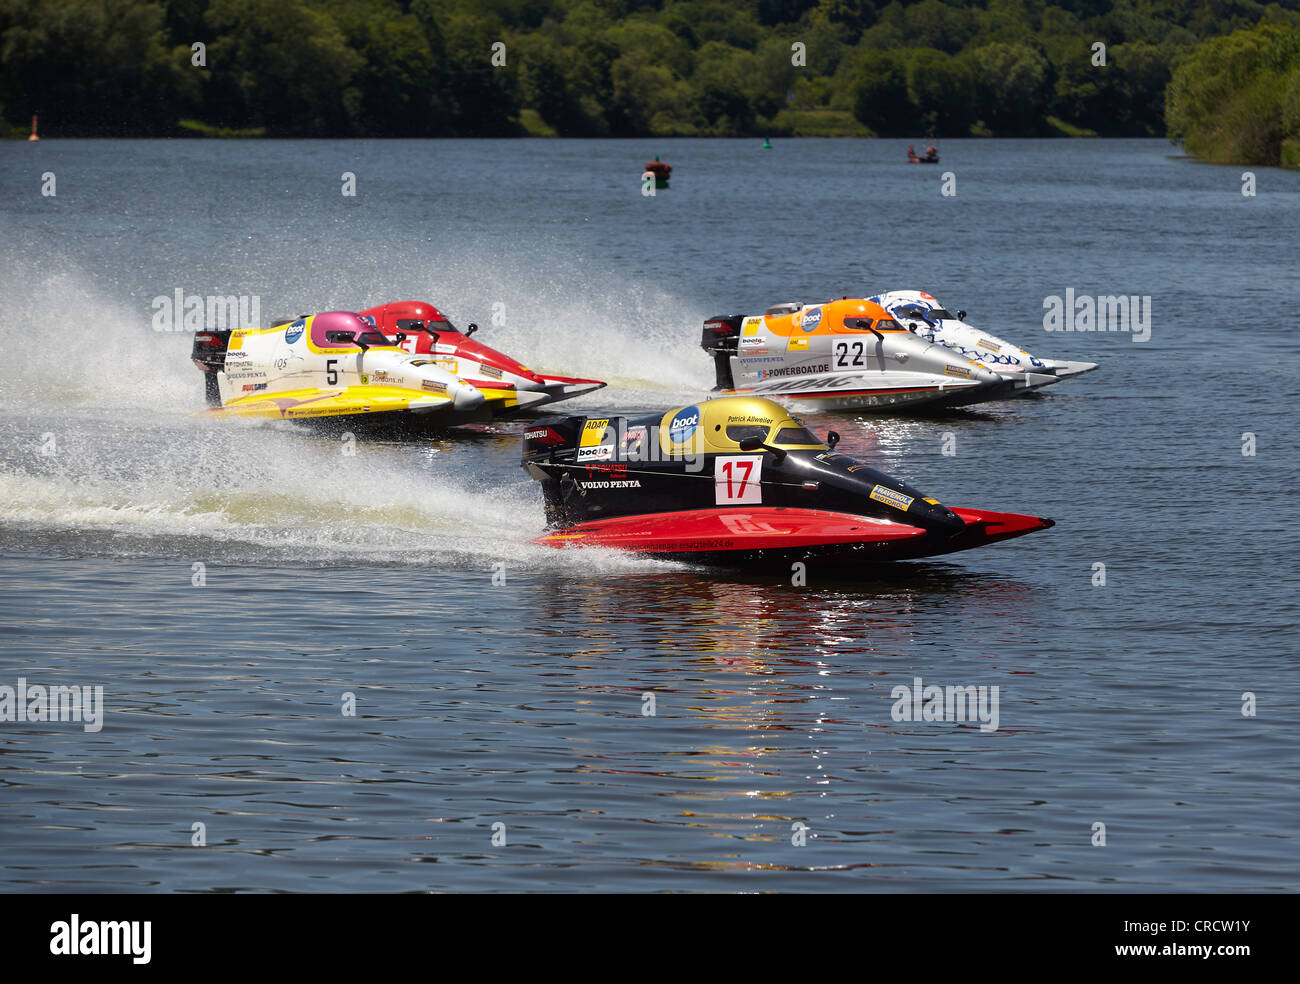 Motor boat race on the Moselle river in Brodenbach, Rhineland-Palatinate, Germany, Europe Stock Photo